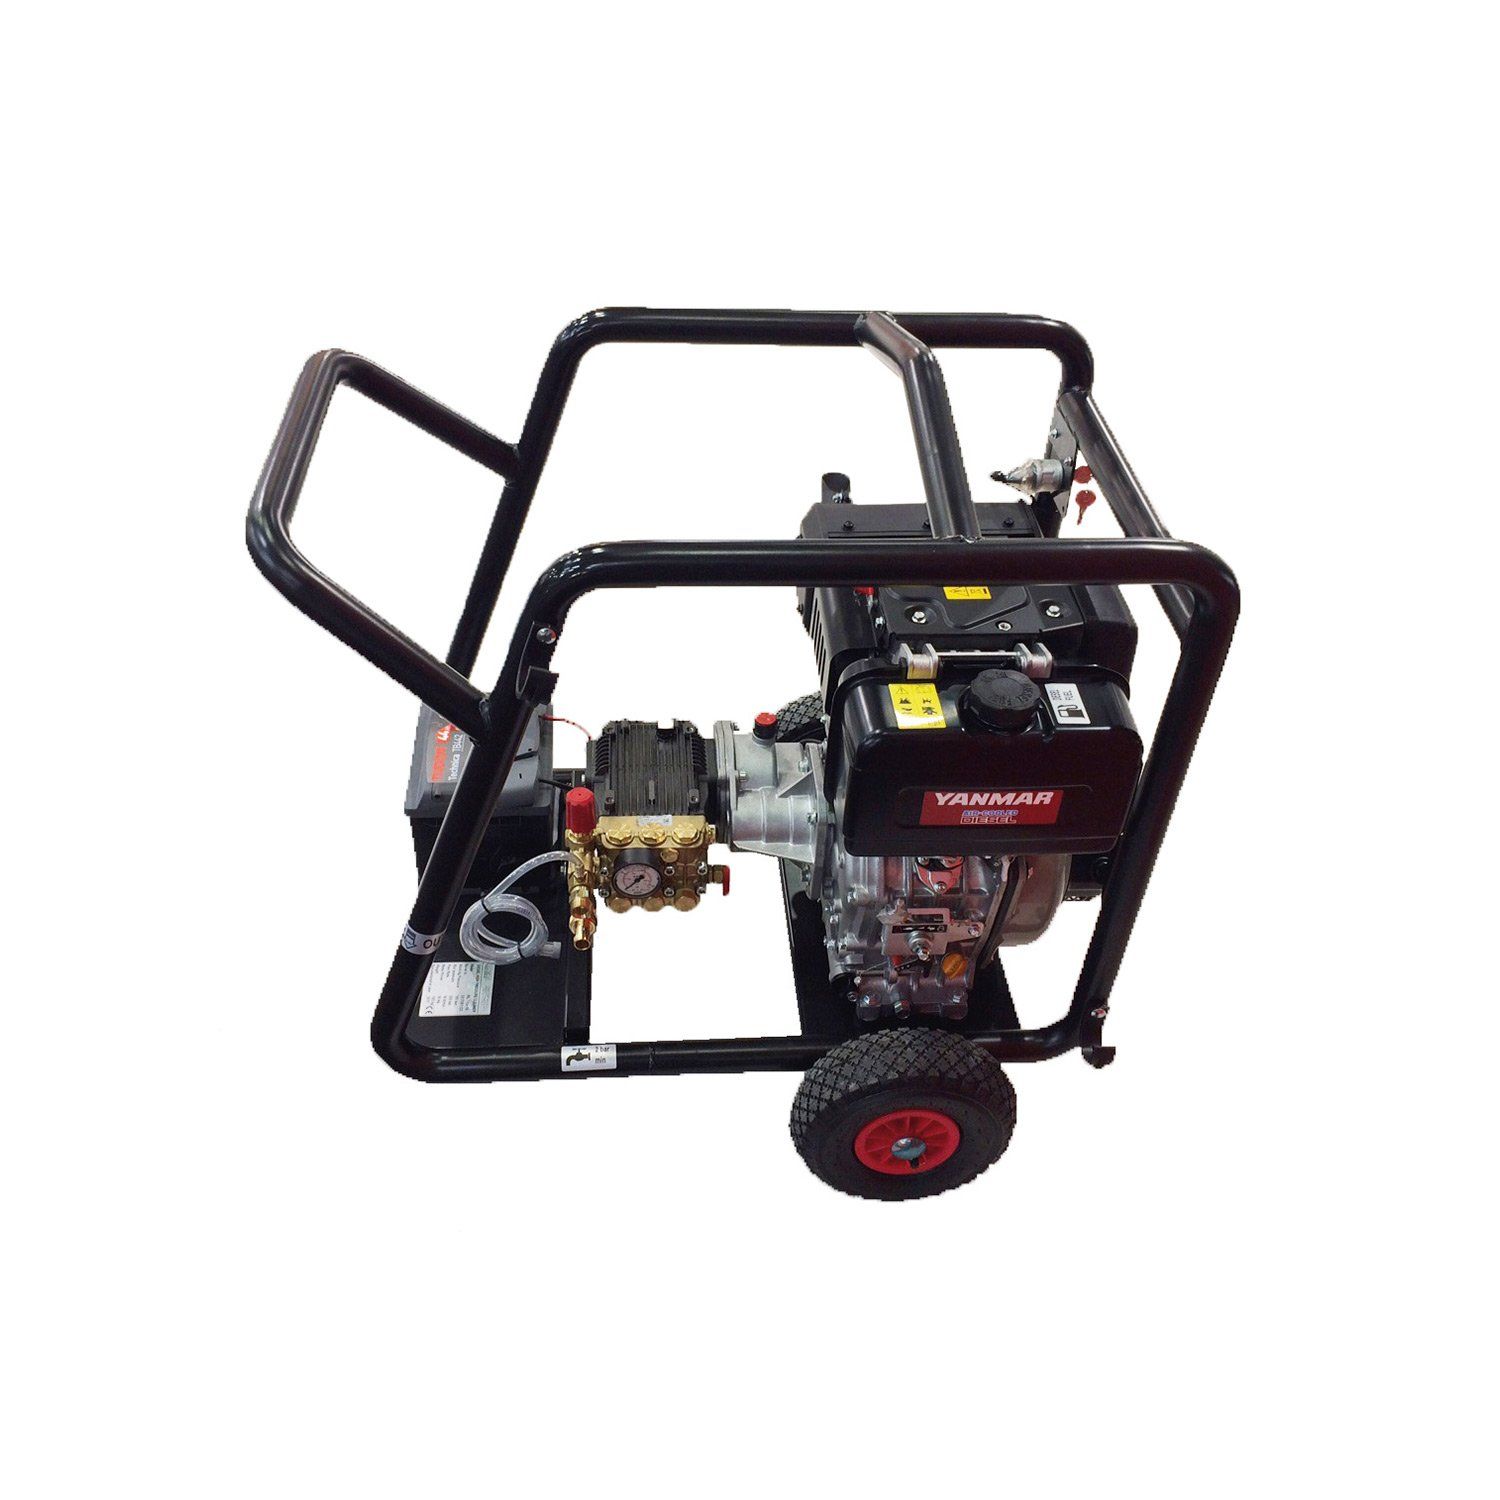 Meclean professional pressure washer with combustion engine DIESELJET 180/16